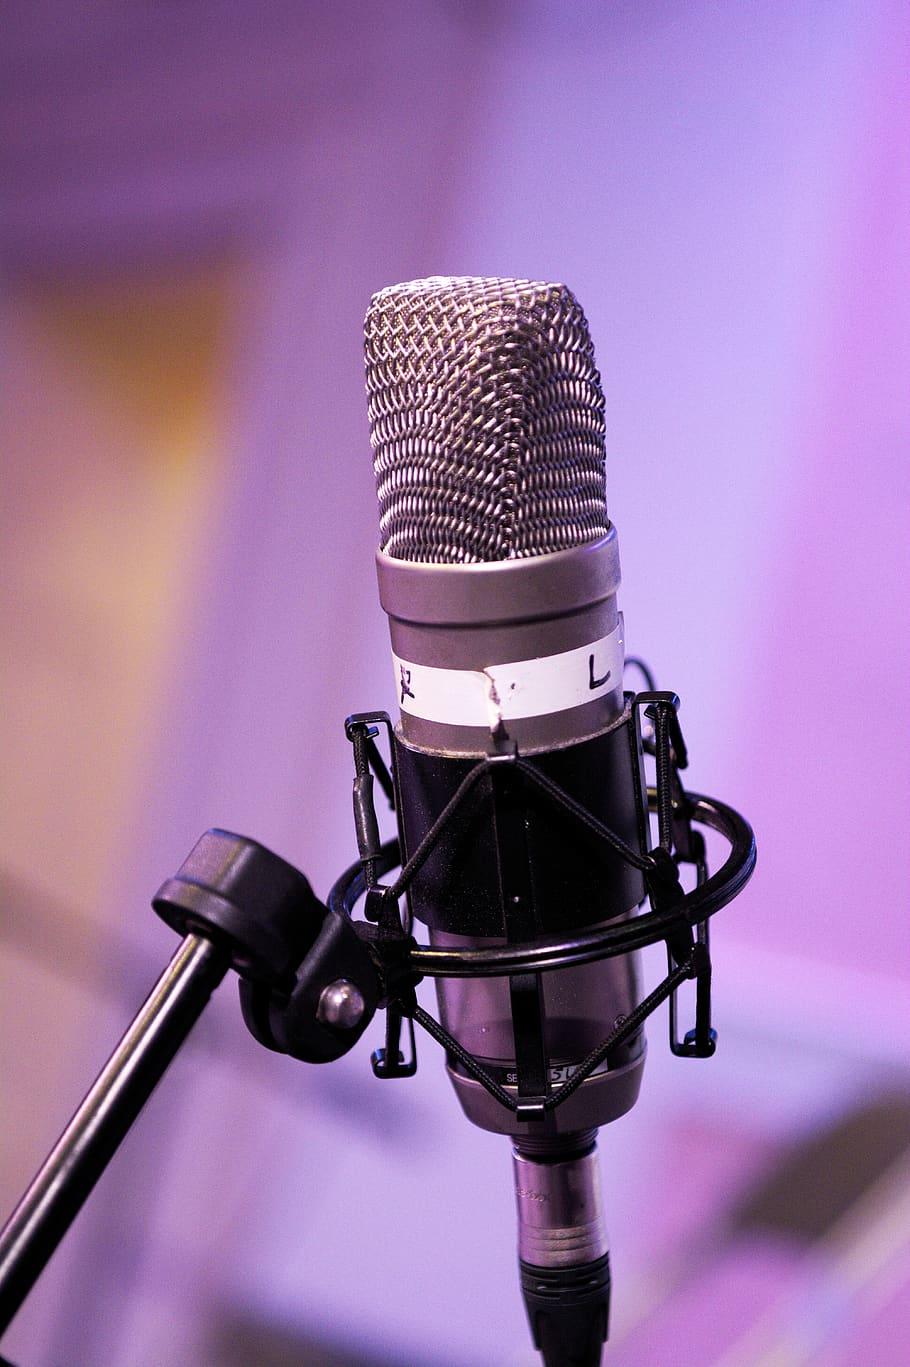 HD wallpaper: mic, podcast, microphone .wallpaperflare.com